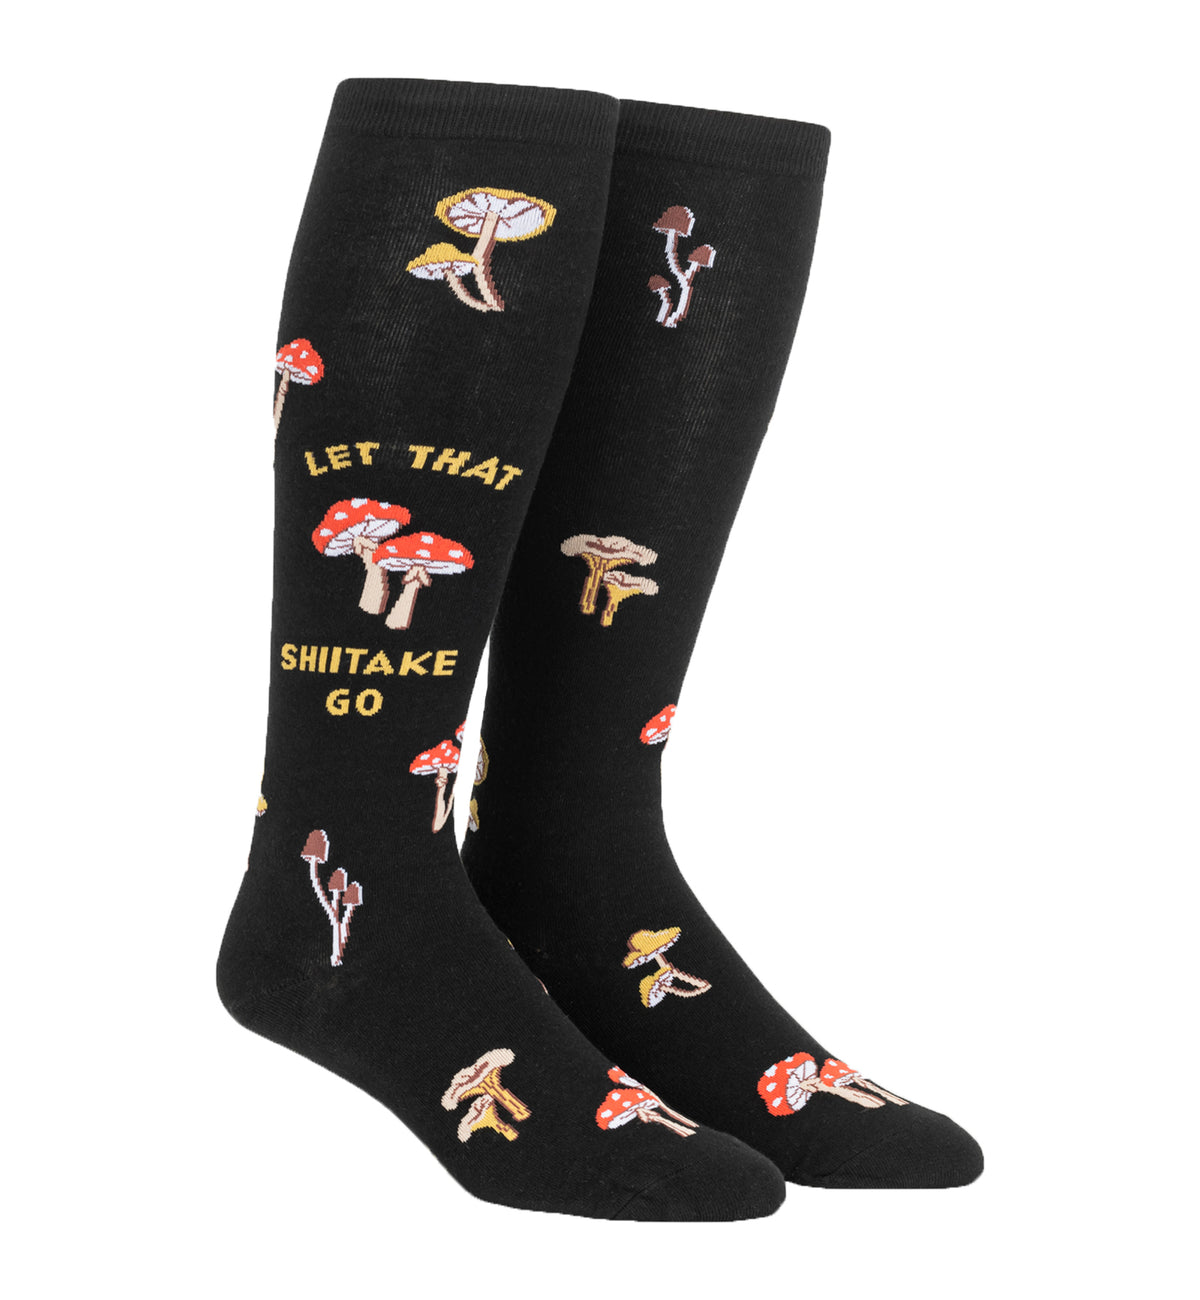 SOCK it to me Unisex Stretch-It Knee High Socks (S0162),Let That Shiitake Go - Let That Shiitake Go,One Size